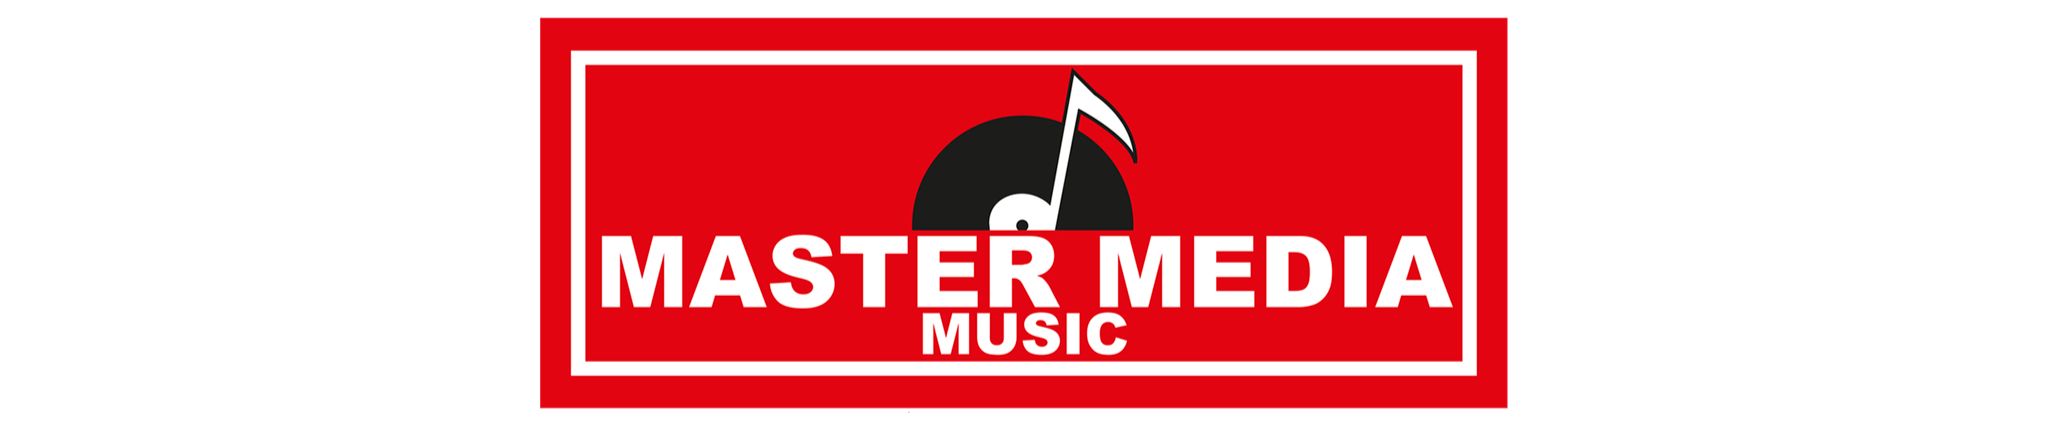 Stream MASTER MEDIA music | to albums, playlists for free on SoundCloud